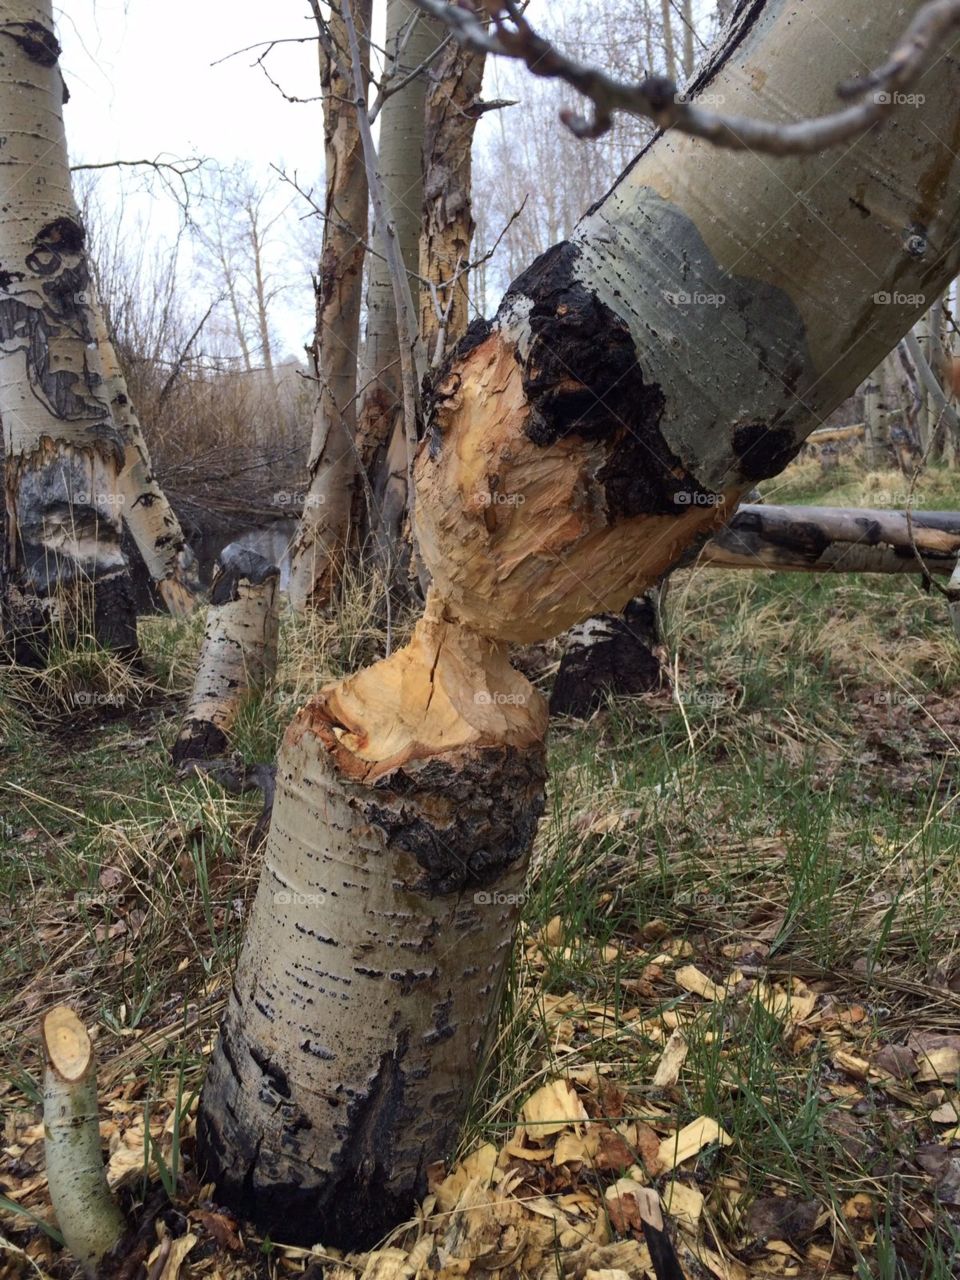 What an interesting find on today’s hiking trip in the mountains. The beavers chopped this tree nearly completely!